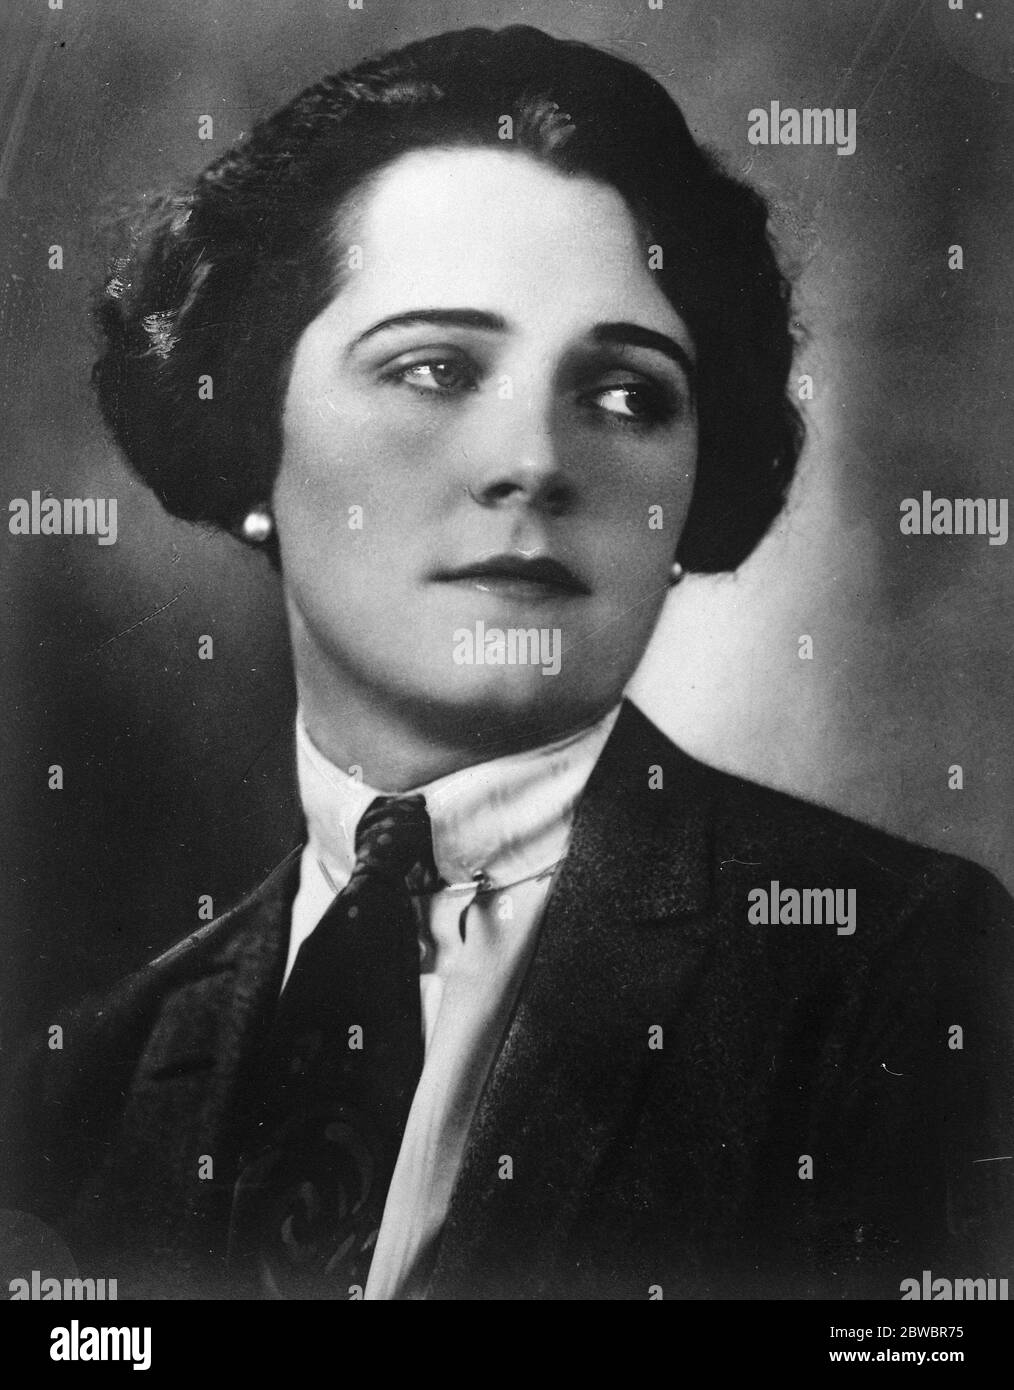 World famous novelist 's niece now dancing for a living . Mlle Olga Tschechowa , niece of Anton Tchekov , the Russian writer , Olga escaped to Germany at the time of the Revolution , and recently went on the stage . 24 December 1926 Stock Photo